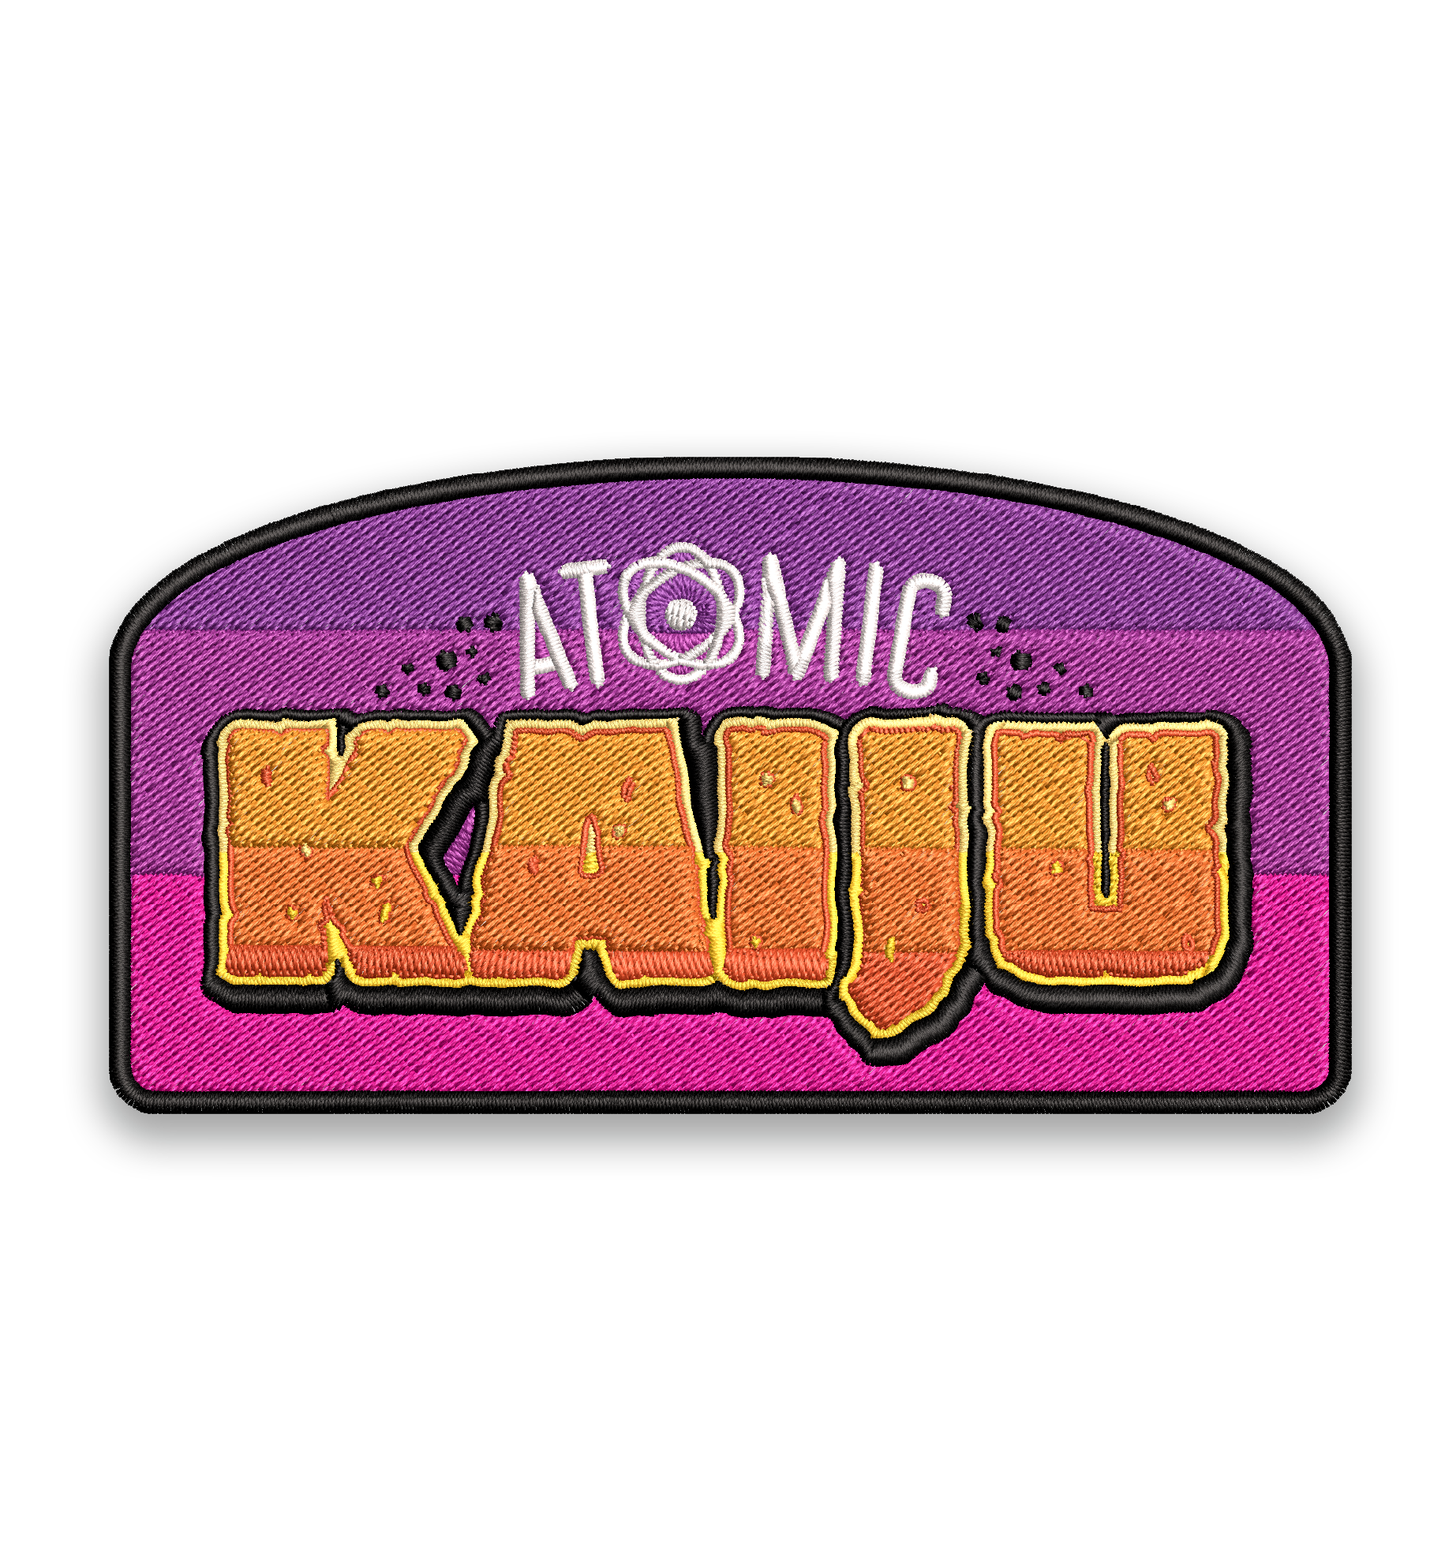 Atomic Kaiju Embroidered Patch